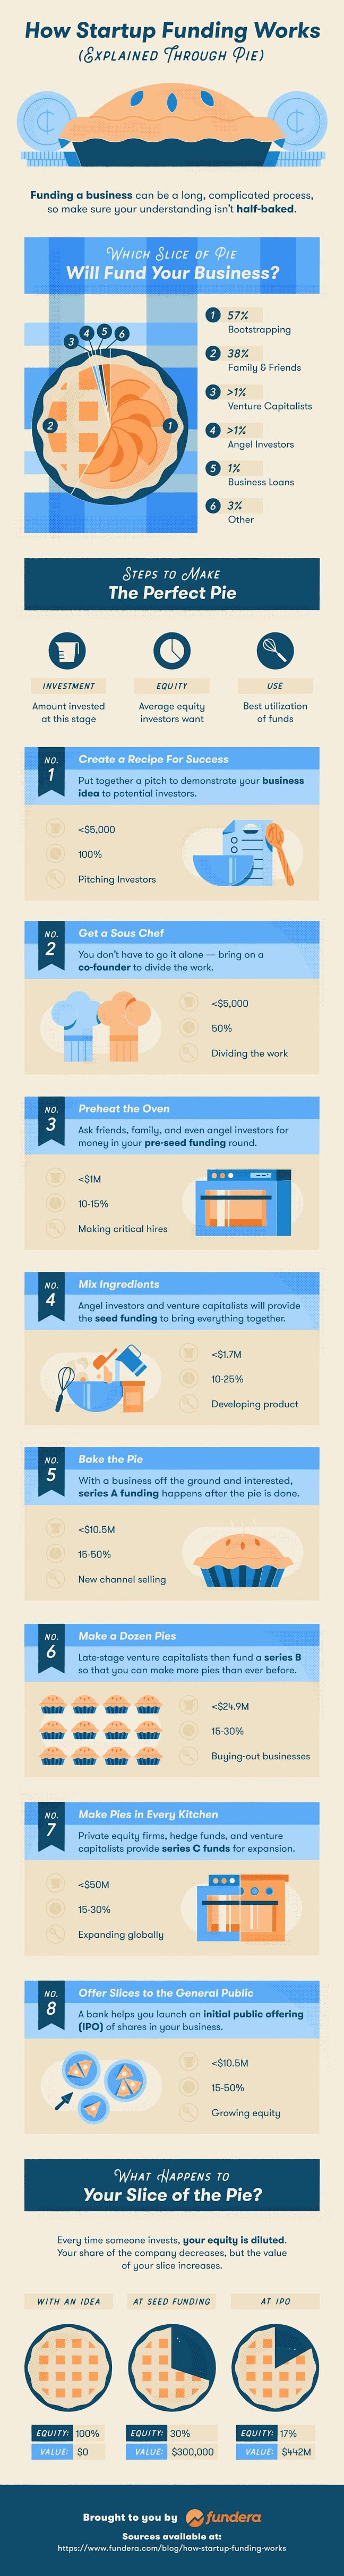 How Startup Funding Works (Explained Through Pie) #infographic